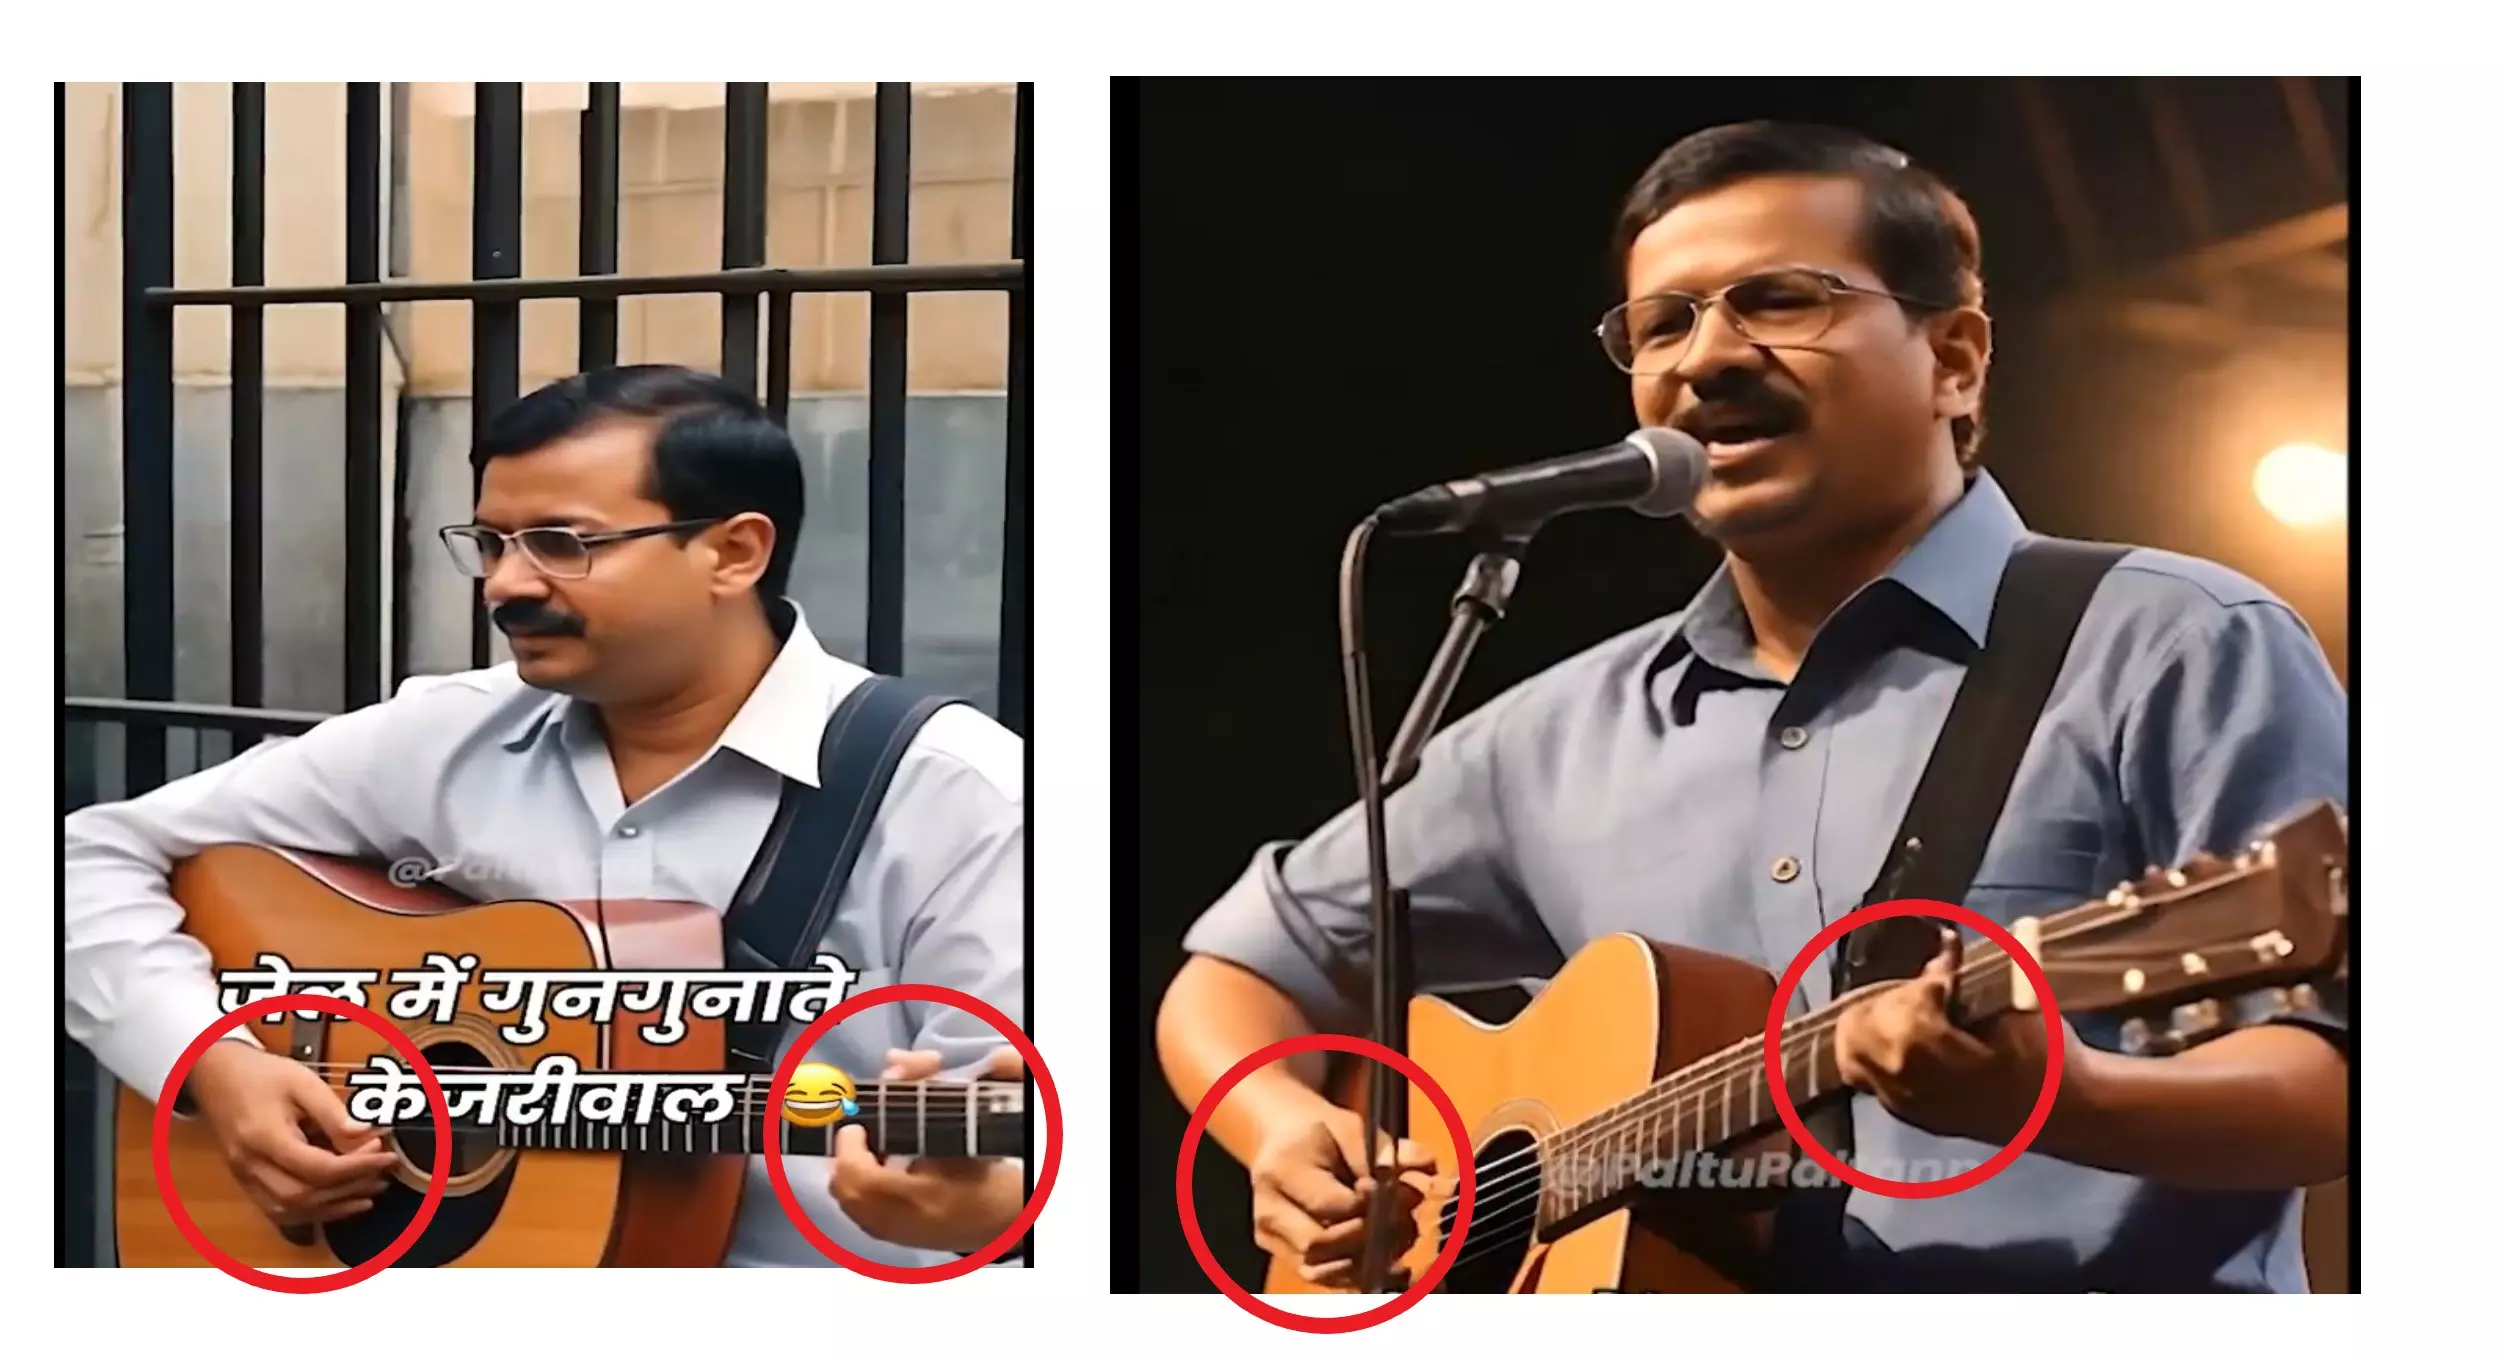 AI Generated photos of CM Arvind Kejriwal used in the viral deepfake video.